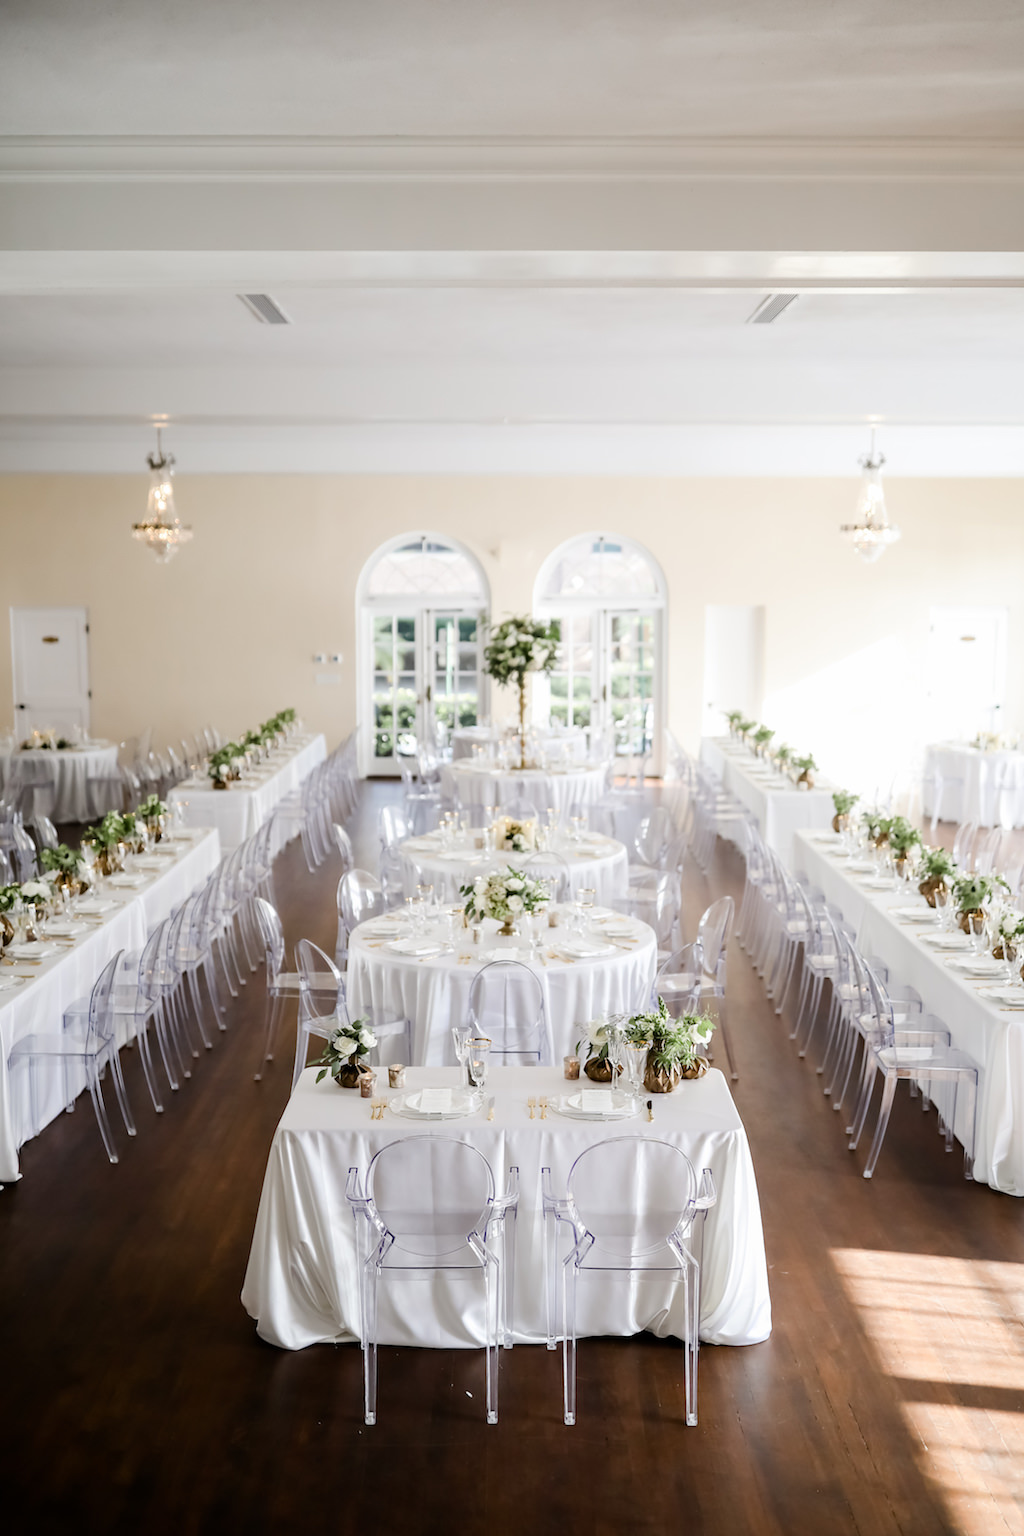 Classic Neutral Wedding Reception Decor, Long Feasting Tables and Round Tables with White Linens, Low Gold Vases with Ivory and Greenery Florals, Clear Ghost Acrylic Chairs | Tampa Bay Wedding Photographer Lifelong Photography Studio | Wedding Rentals Kate Ryan Event Rentals | Historic Wedding Venue The Orlo